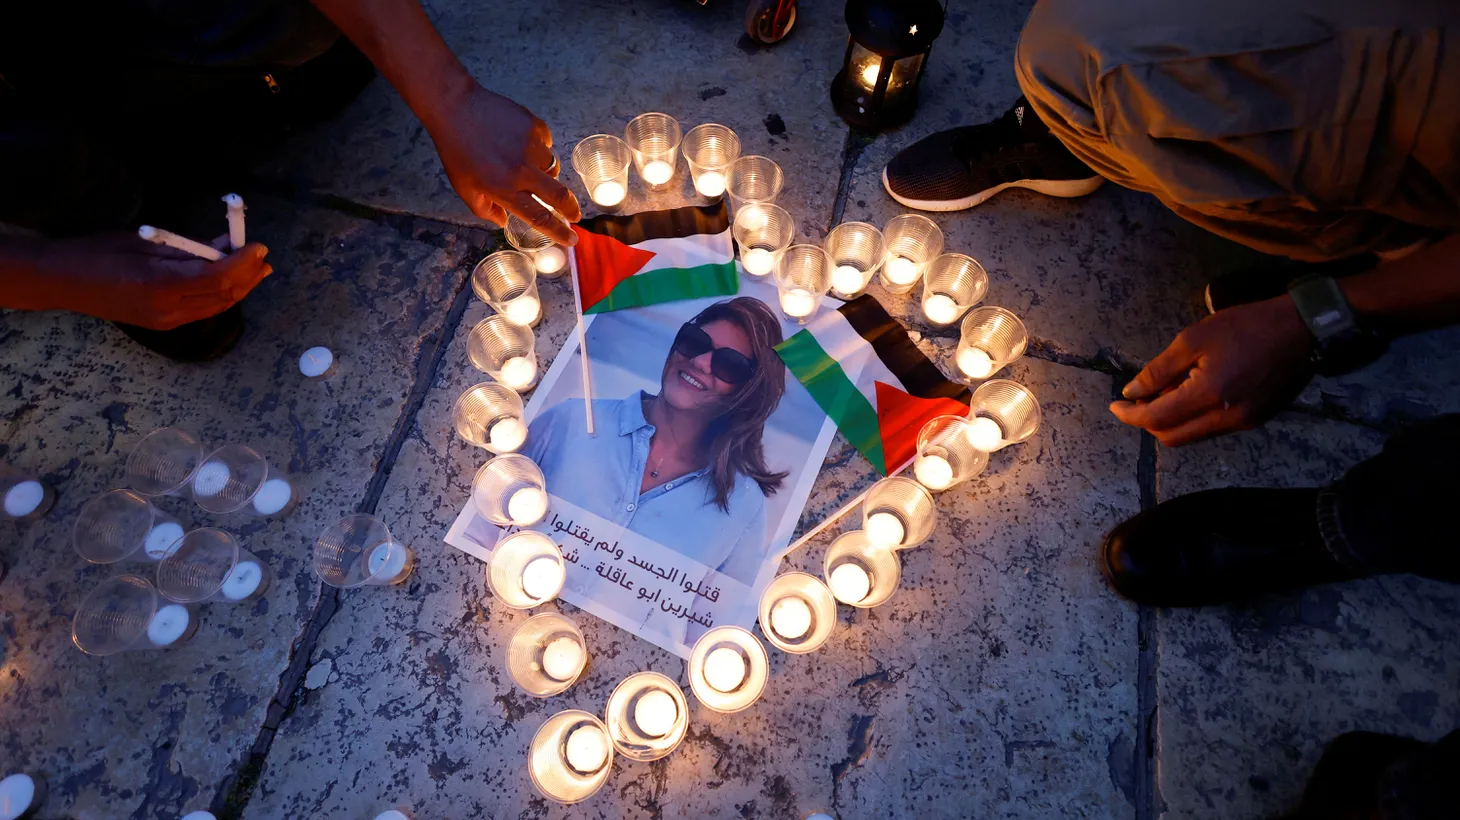 People light candles during a vigil in memory of Al Jazeera journalist Shireen Abu Akleh, who was killed during an Israeli raid, outside the Church of the Nativity in Bethlehem, in the Israeli-occupied West Bank, May 16, 2022.